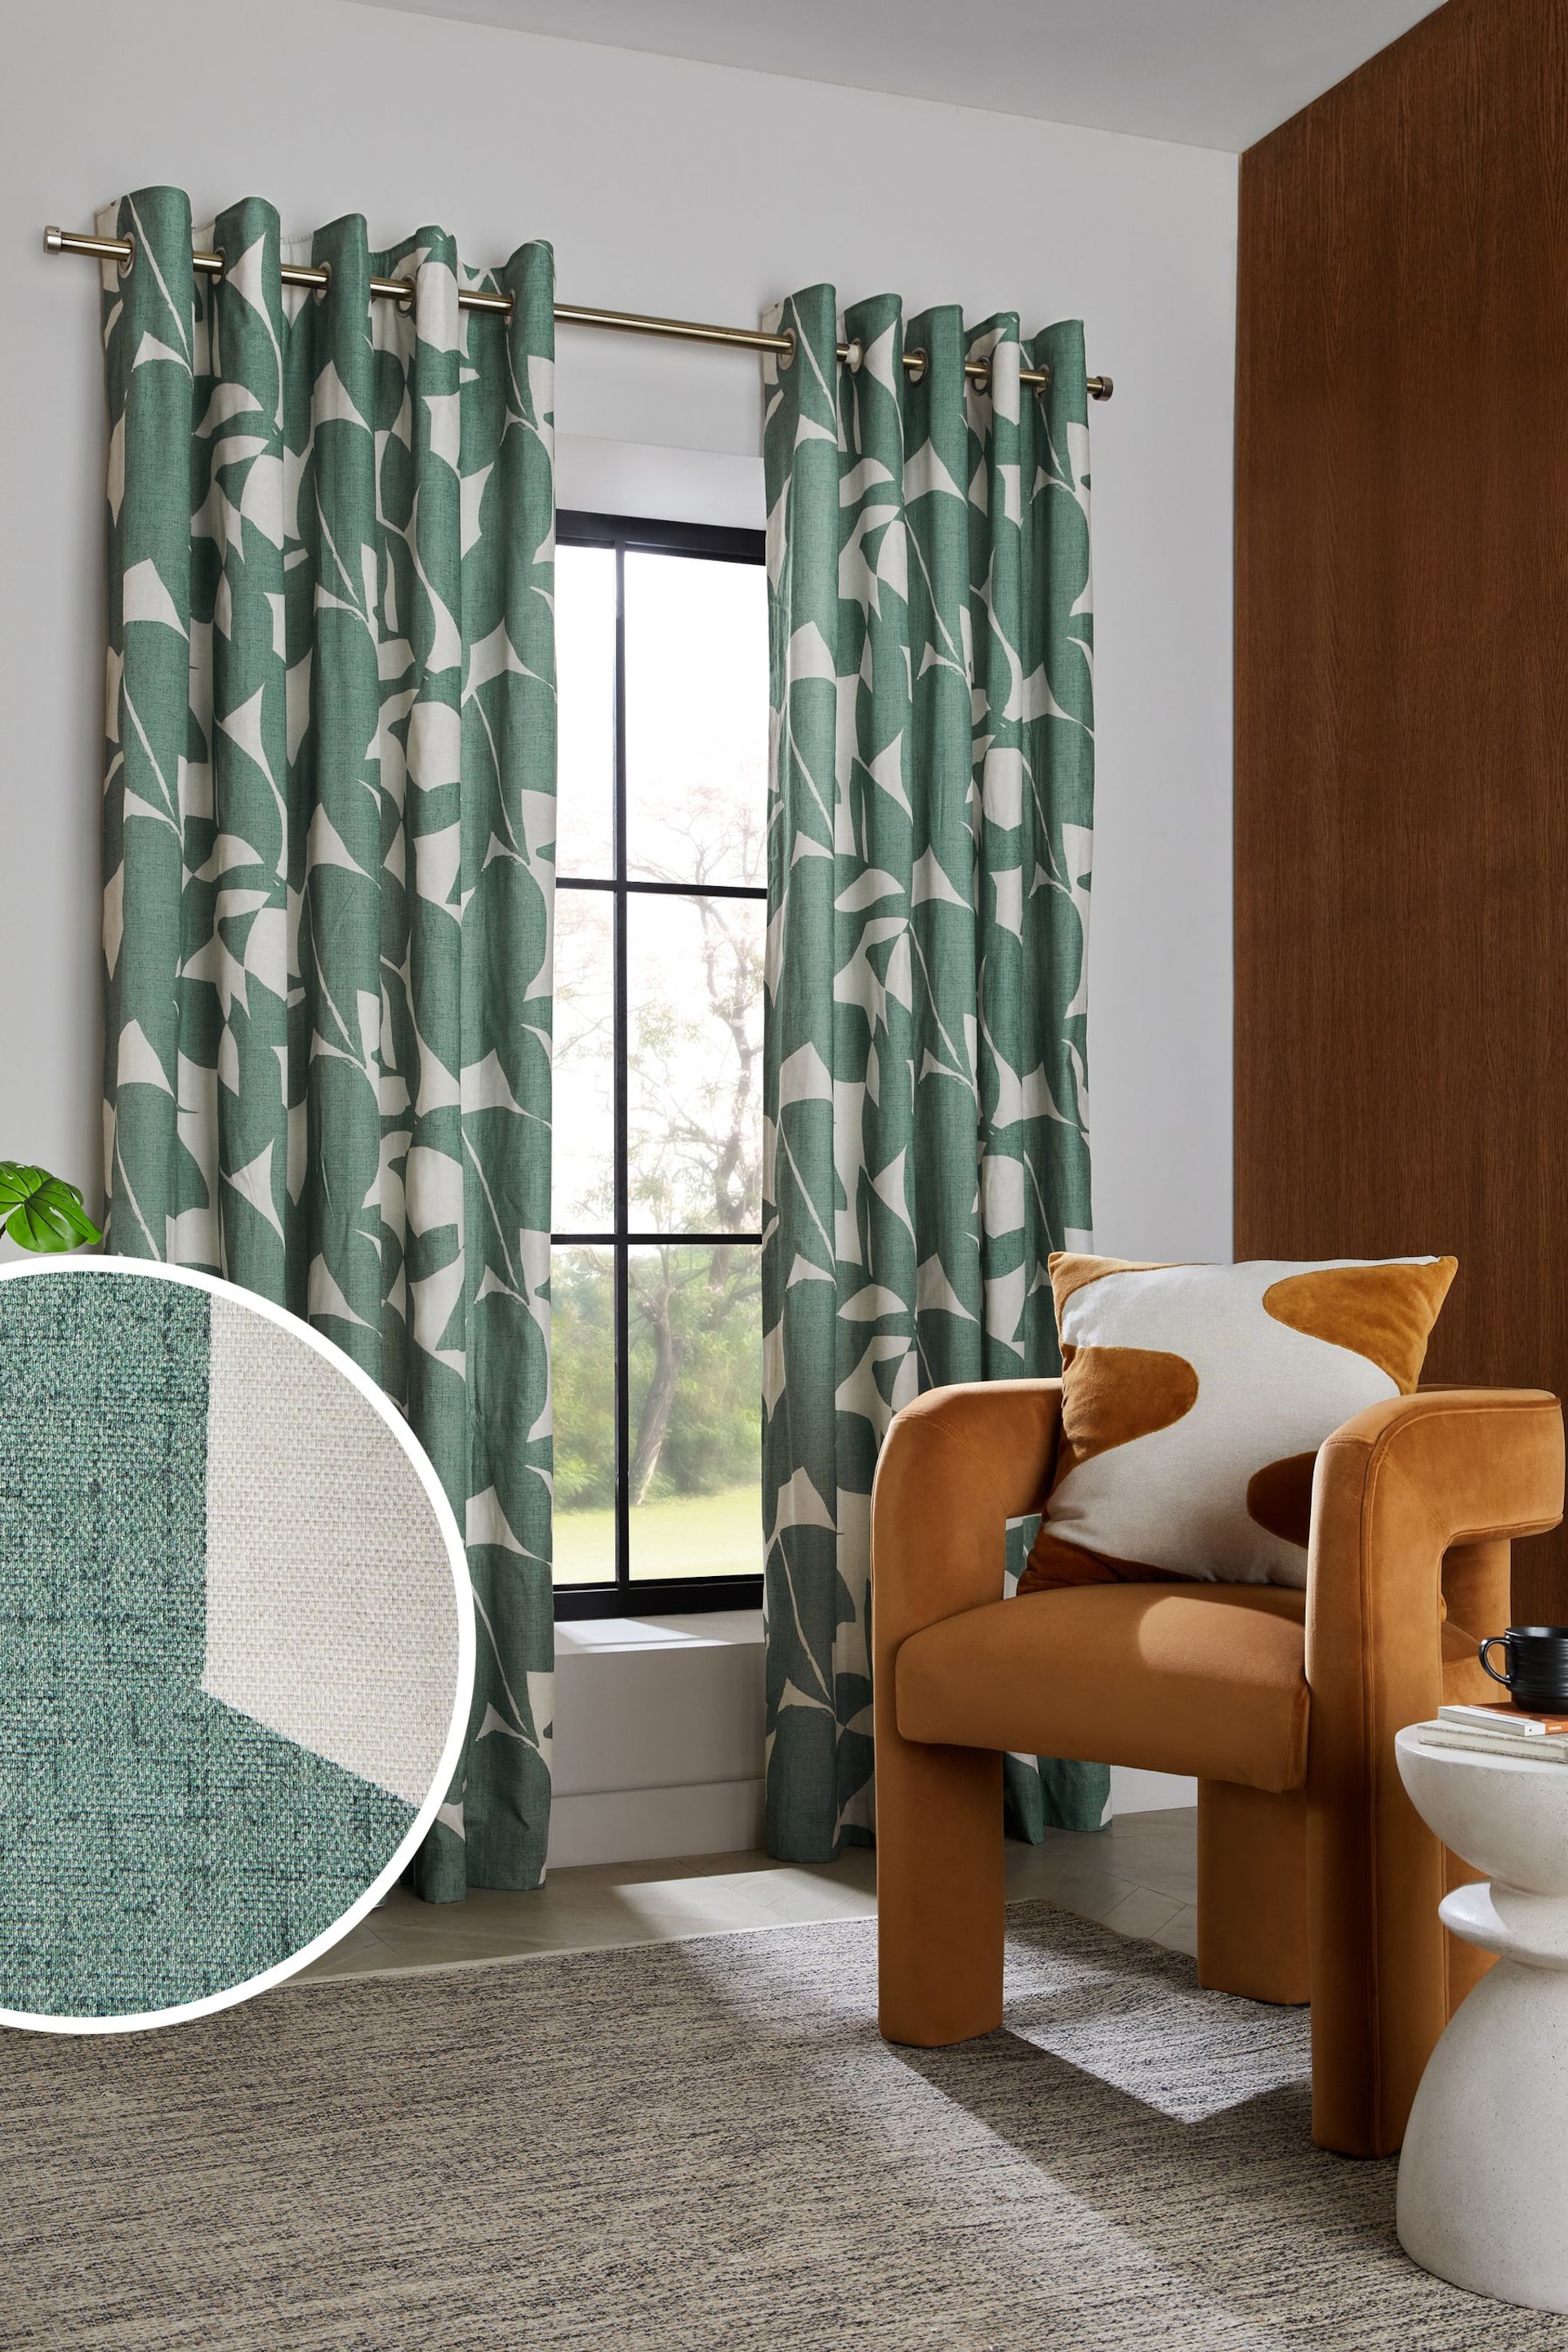 Teal Green Overscale Leaf Eyelet Lined Curtains - Image 1 of 5